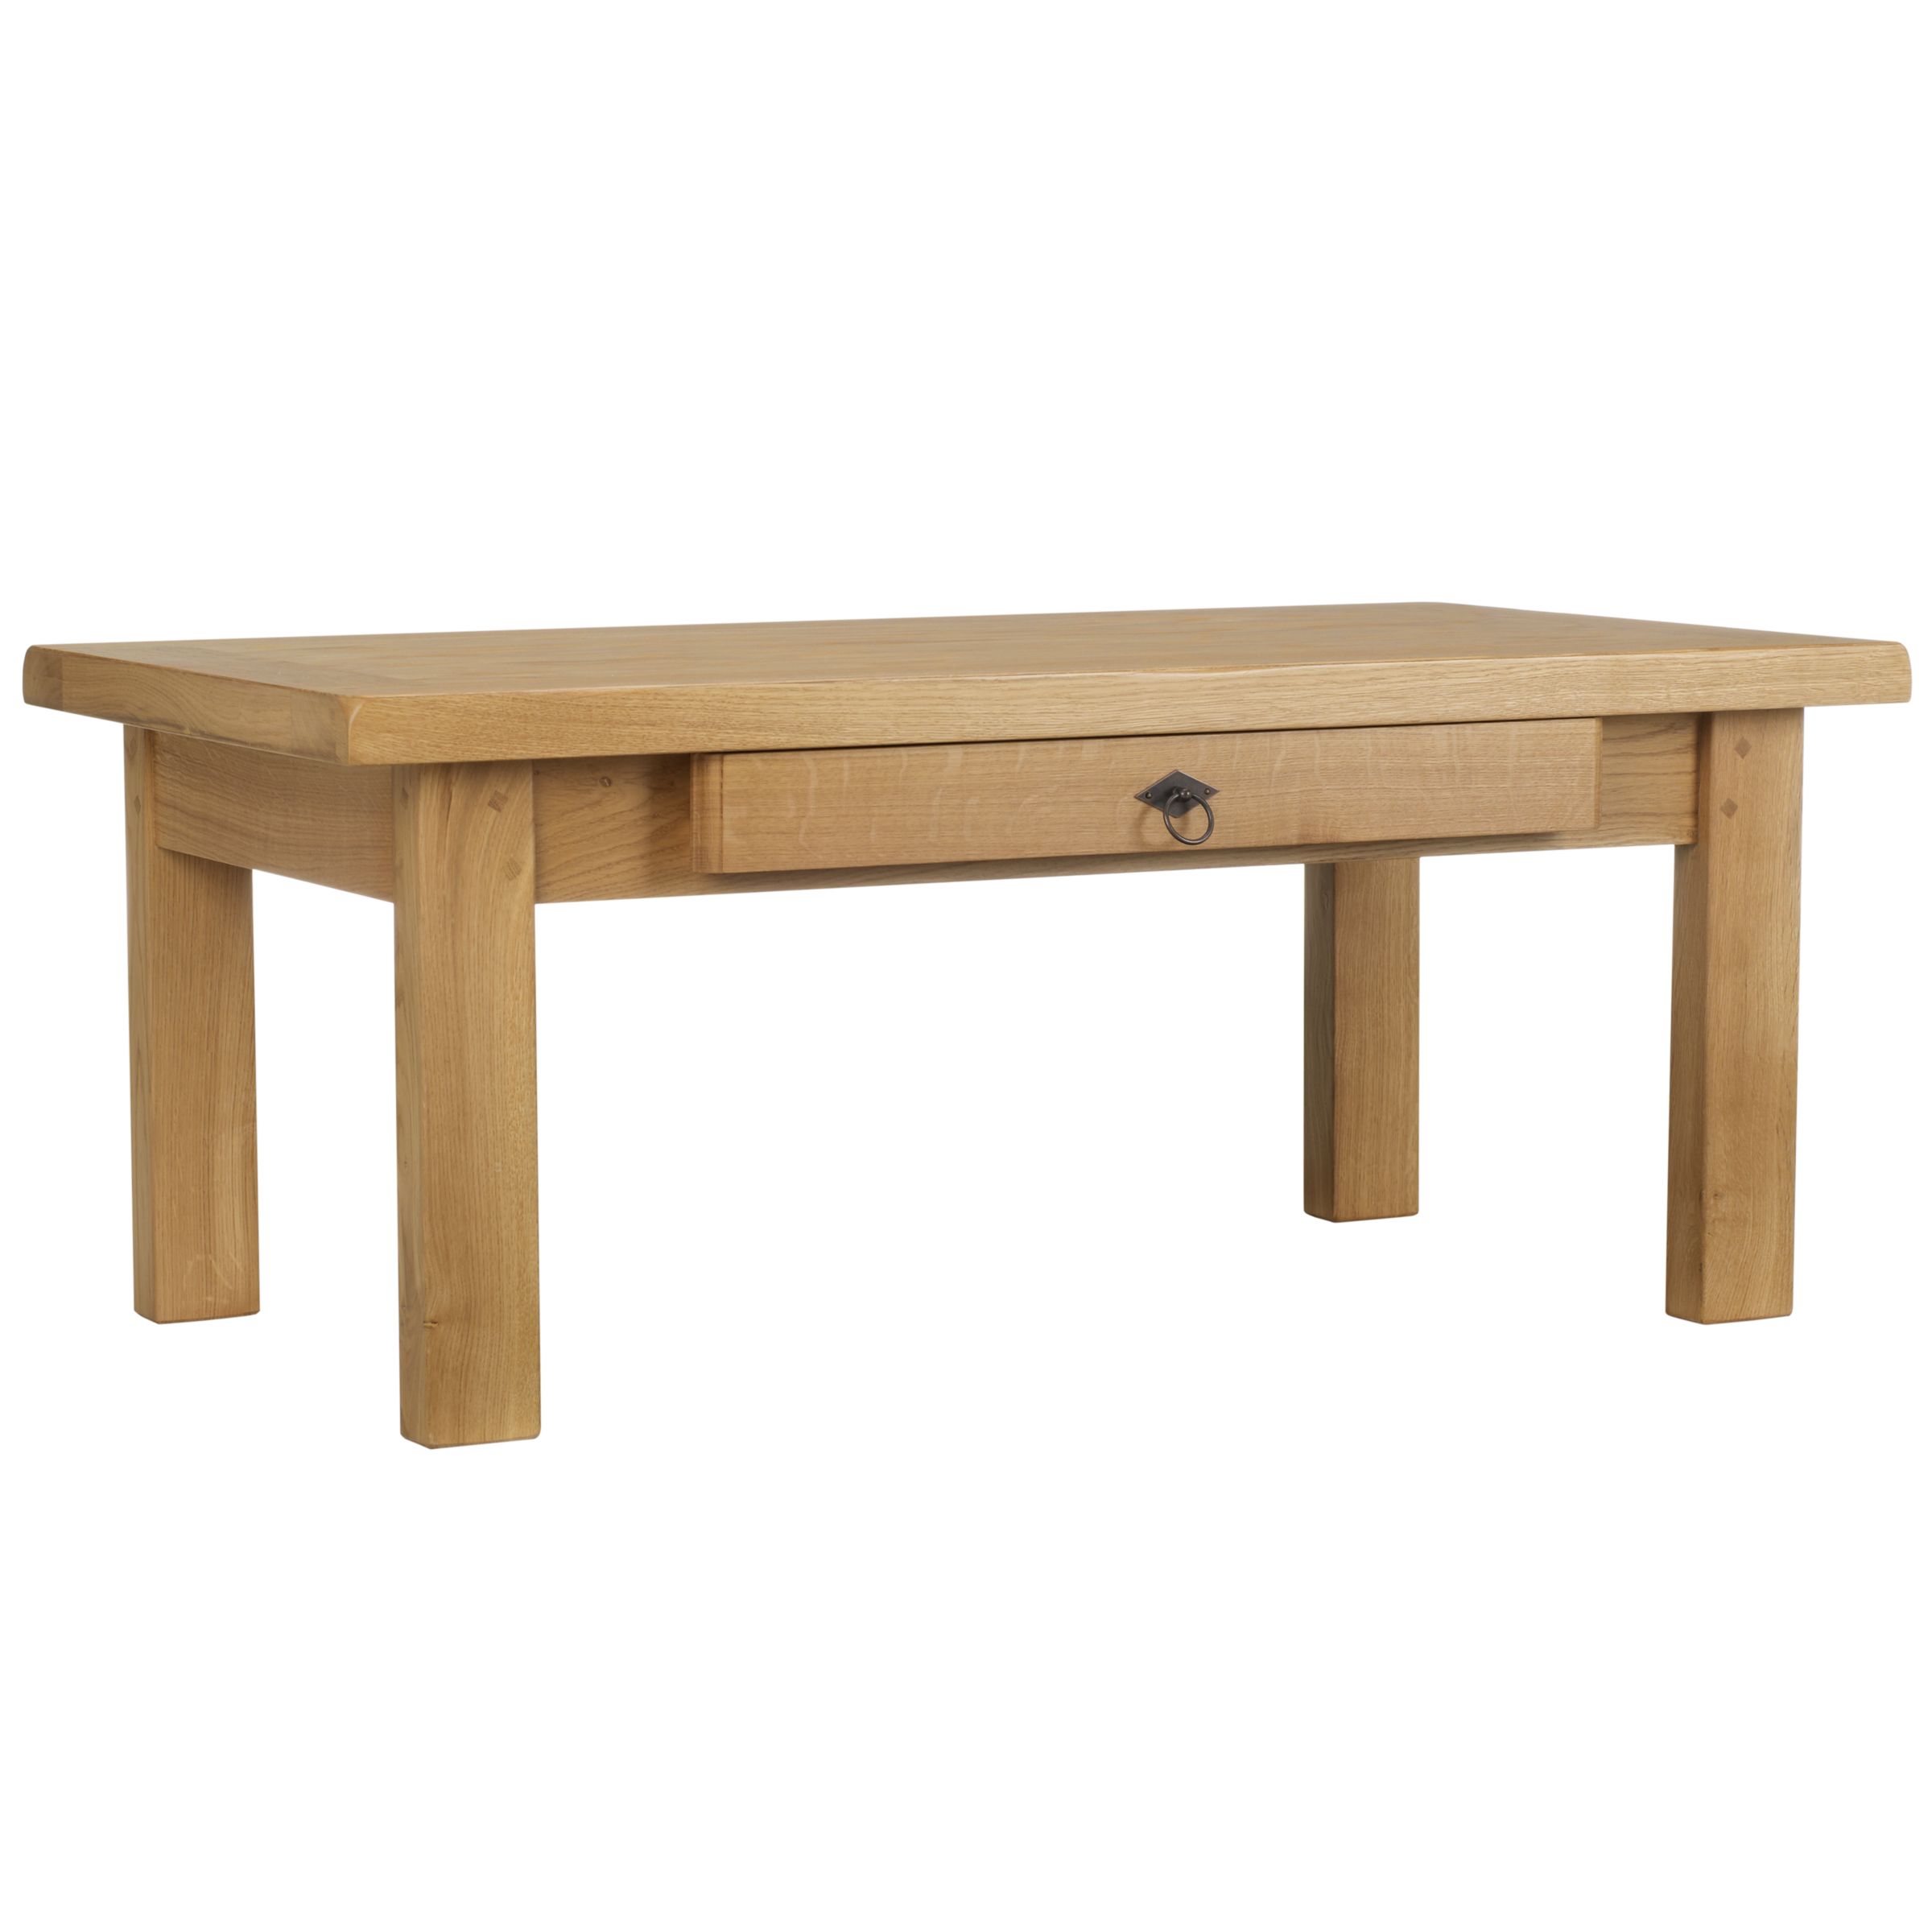 Ardennes Coffee Table, Cognac at JohnLewis